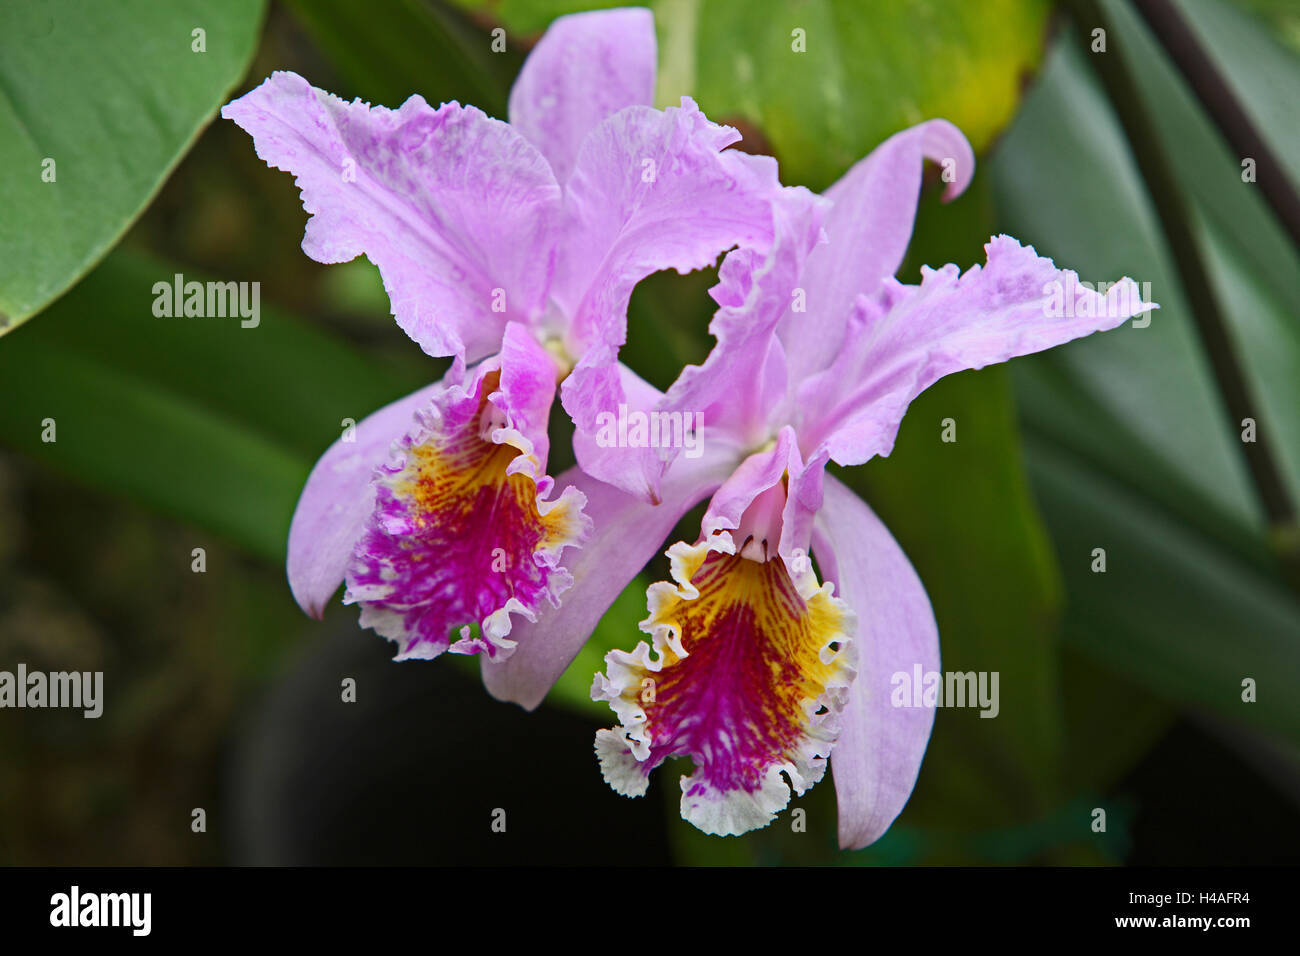 flowers, botany, blossoms, orchids Stock Photo